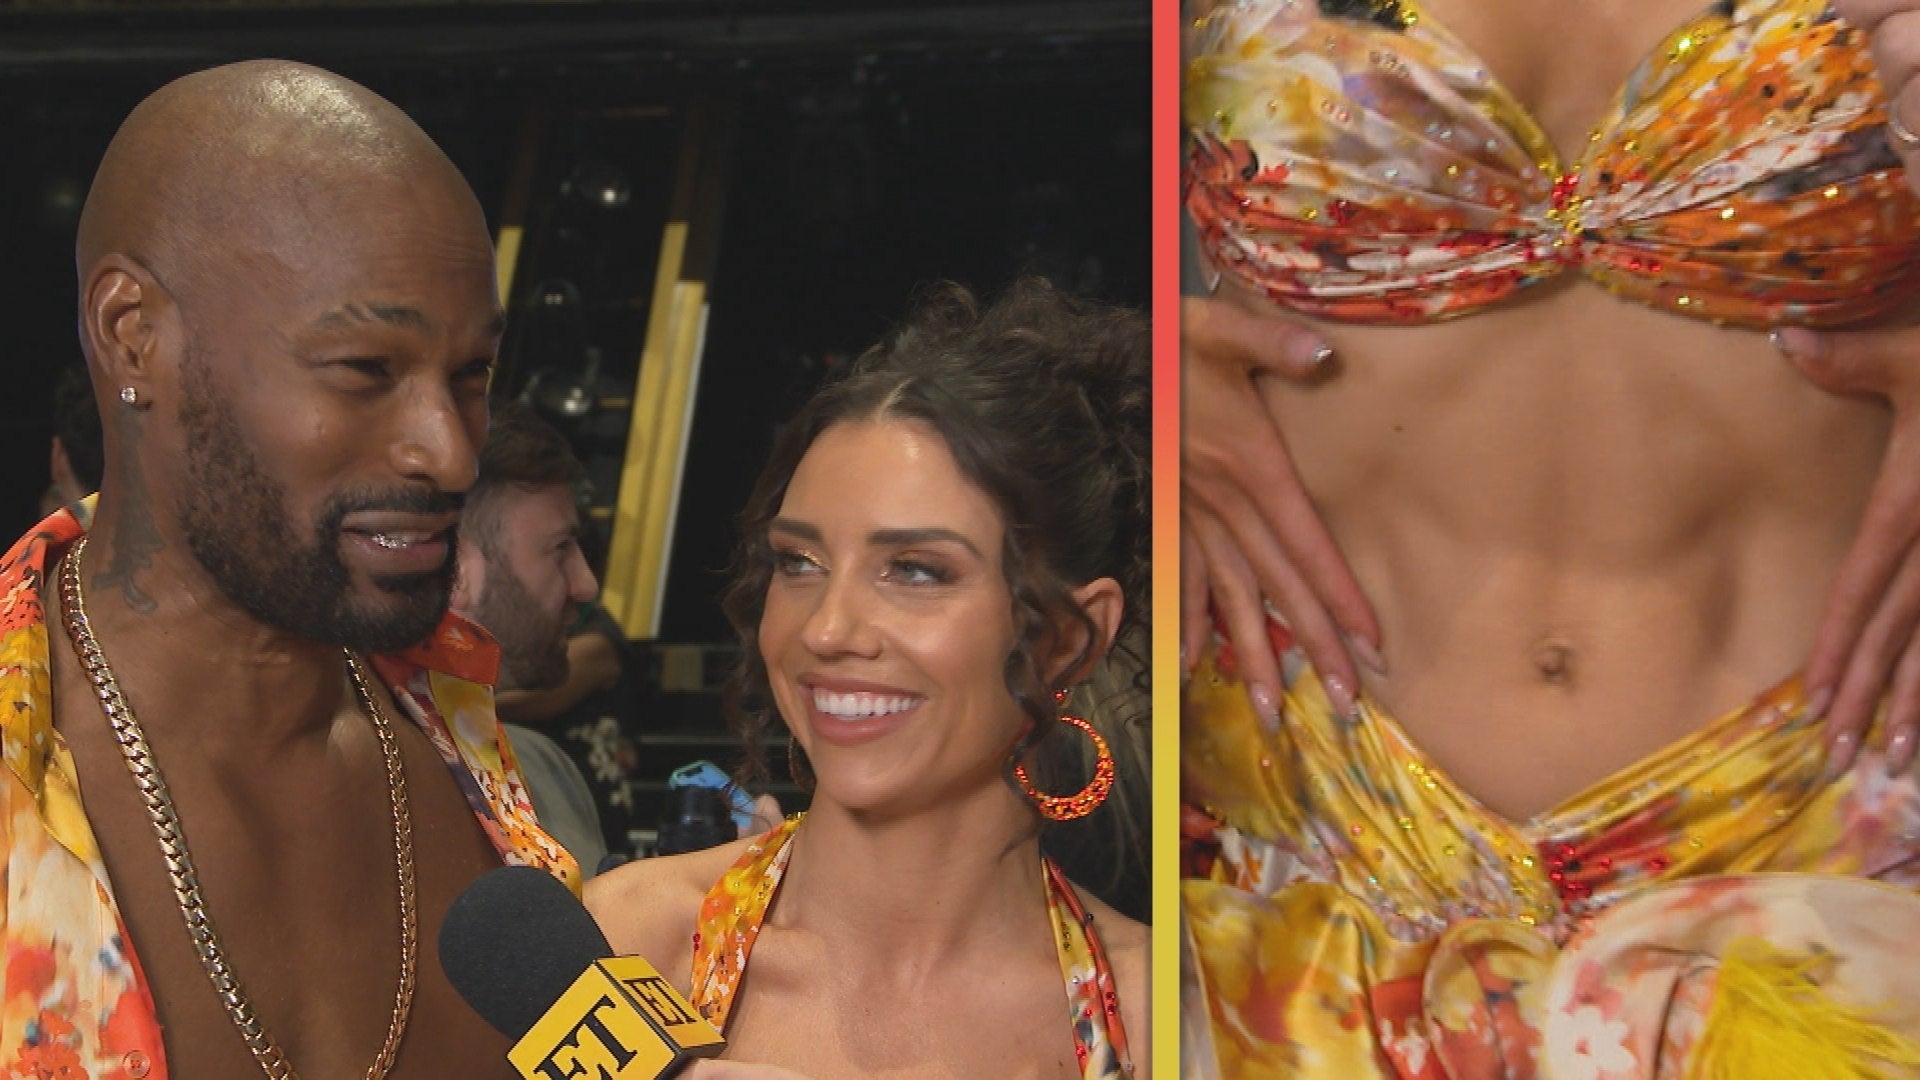 Tyson Beckford Can't Stop Hyping 'DWTS' Partner Jenna Johnson's 6-Pack Abs (Exclusive)